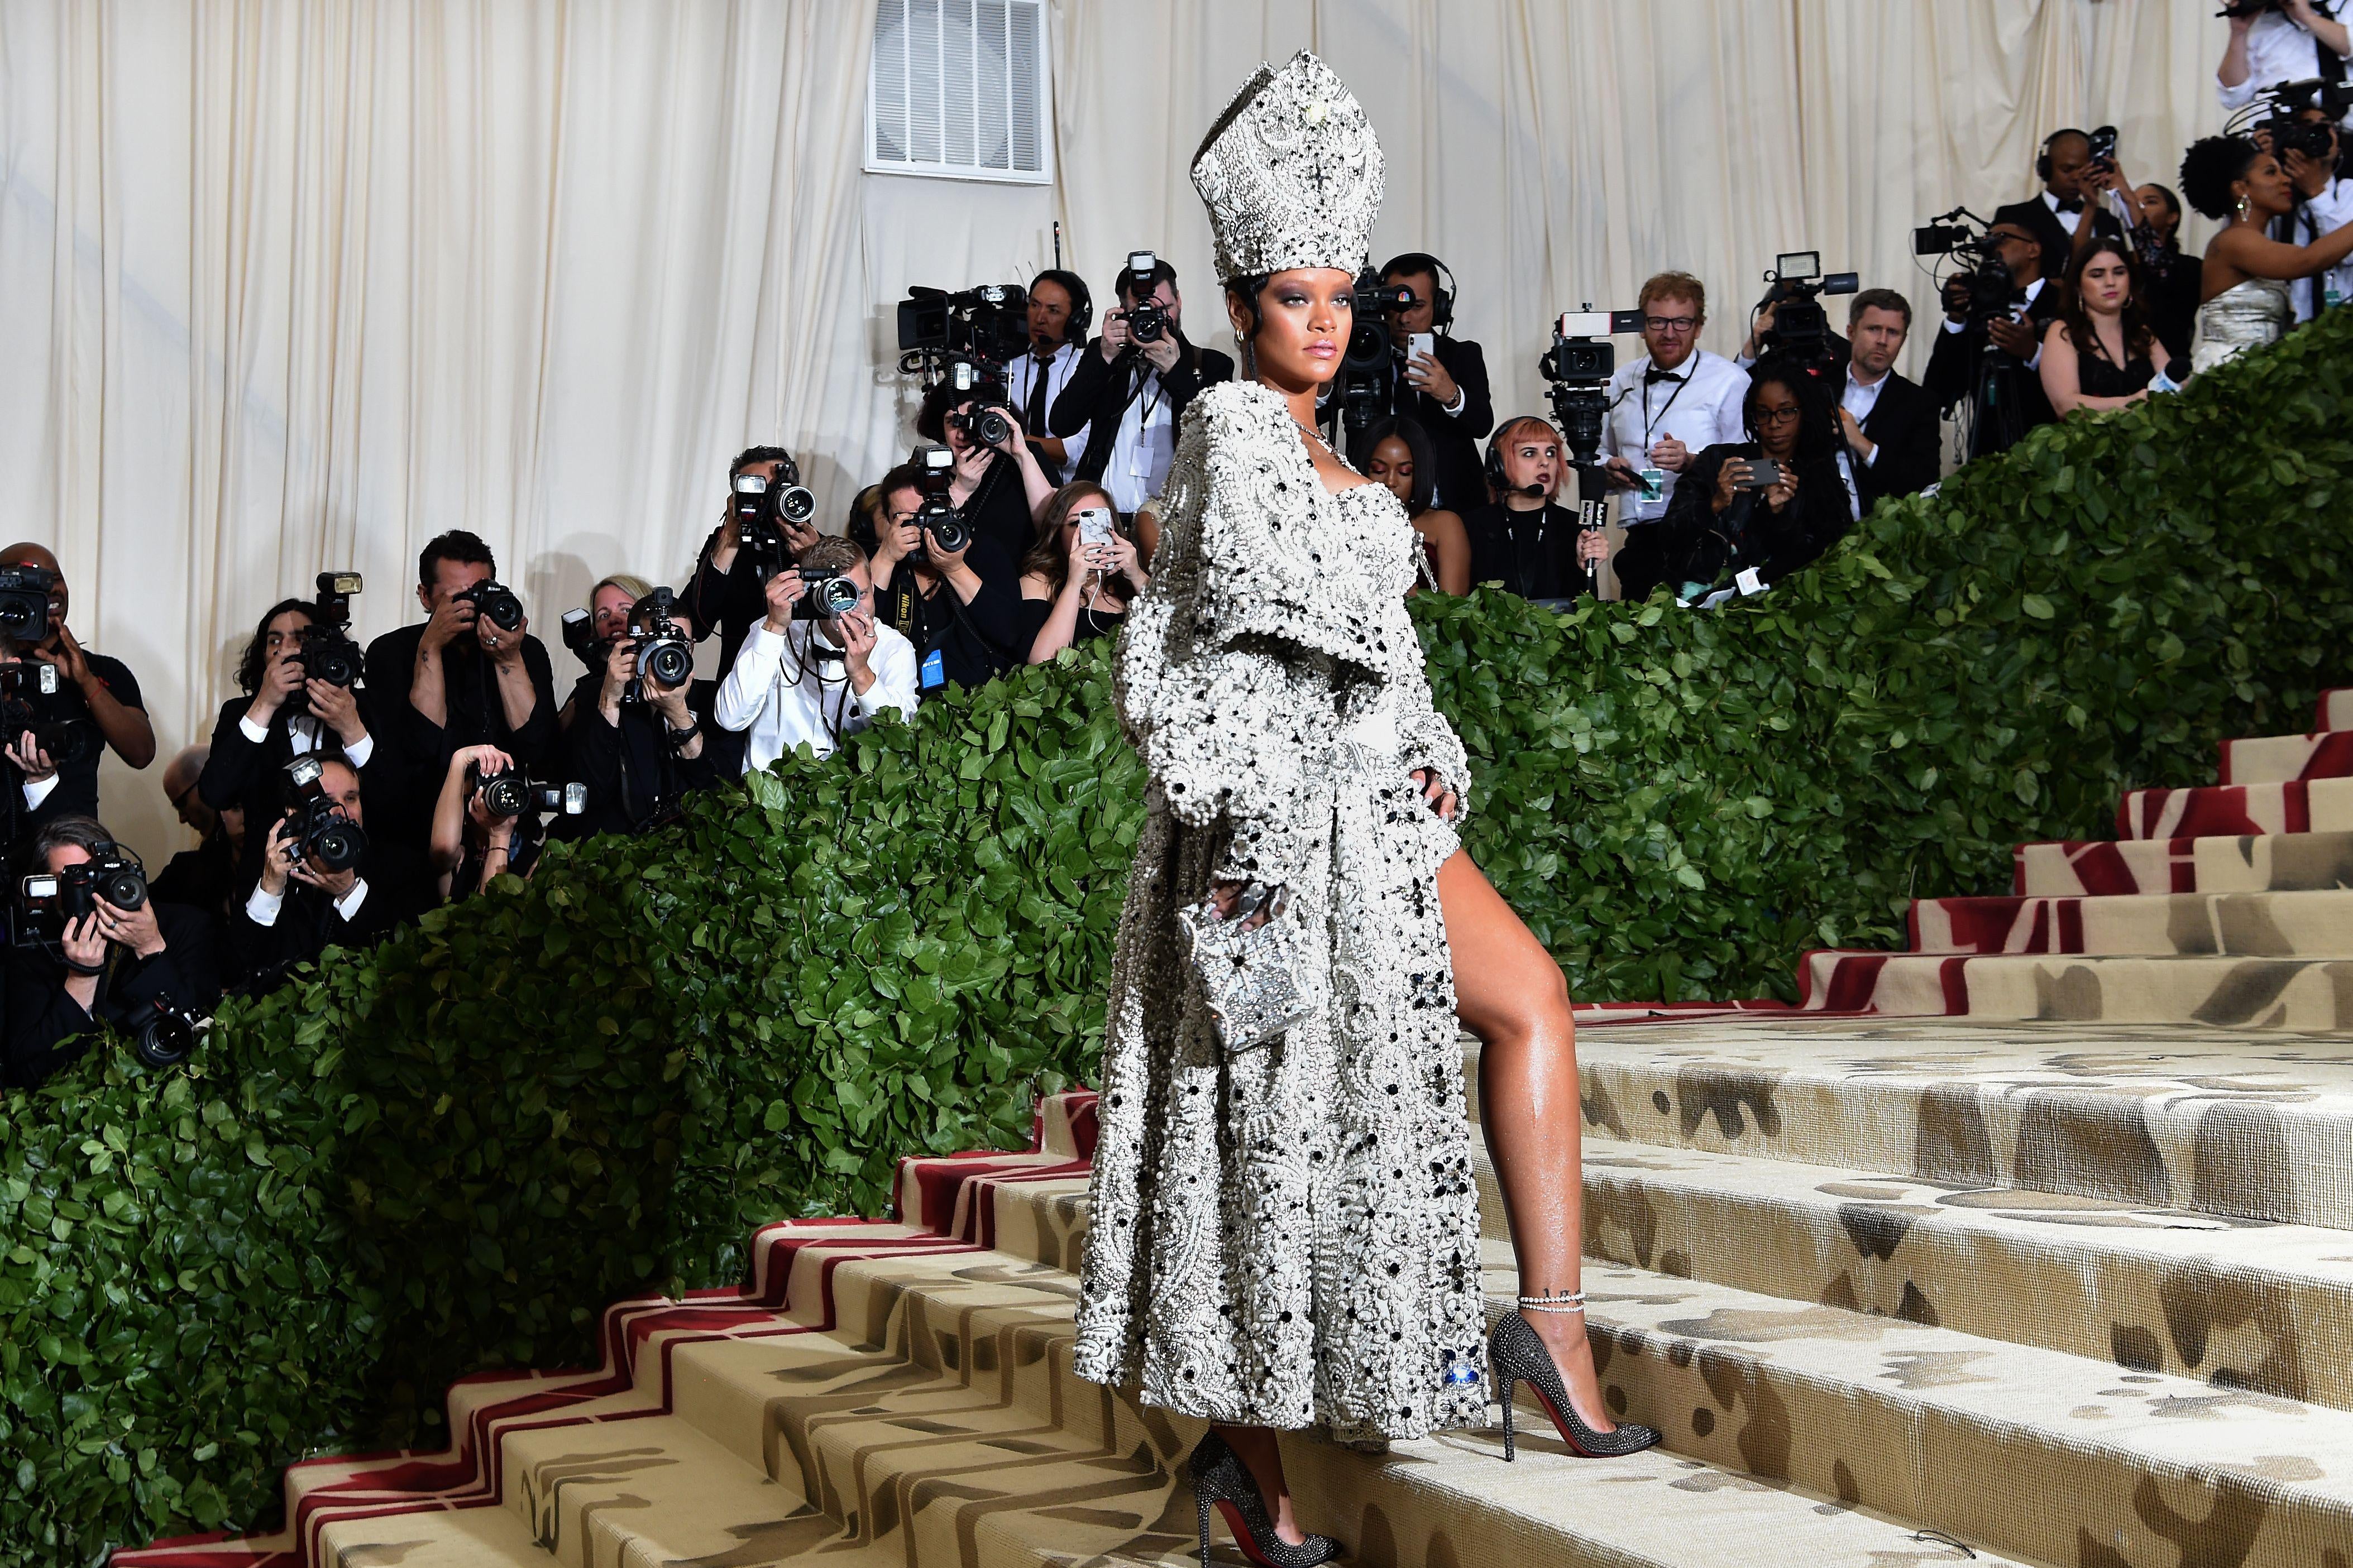 Rihanna arrives for the 2018 Met Gala on May 7, 2018, at the Metropolitan Museum of Art in New York. - The Gala raises money for the Metropolitan Museum of Arts Costume Institute. The Gala's 2018 theme is Heavenly Bodies: Fashion and the Catholic Imagination. (Photo by Hector RETAMAL / AFP)        (Photo credit should read HECTOR RETAMAL/AFP/Getty Images)